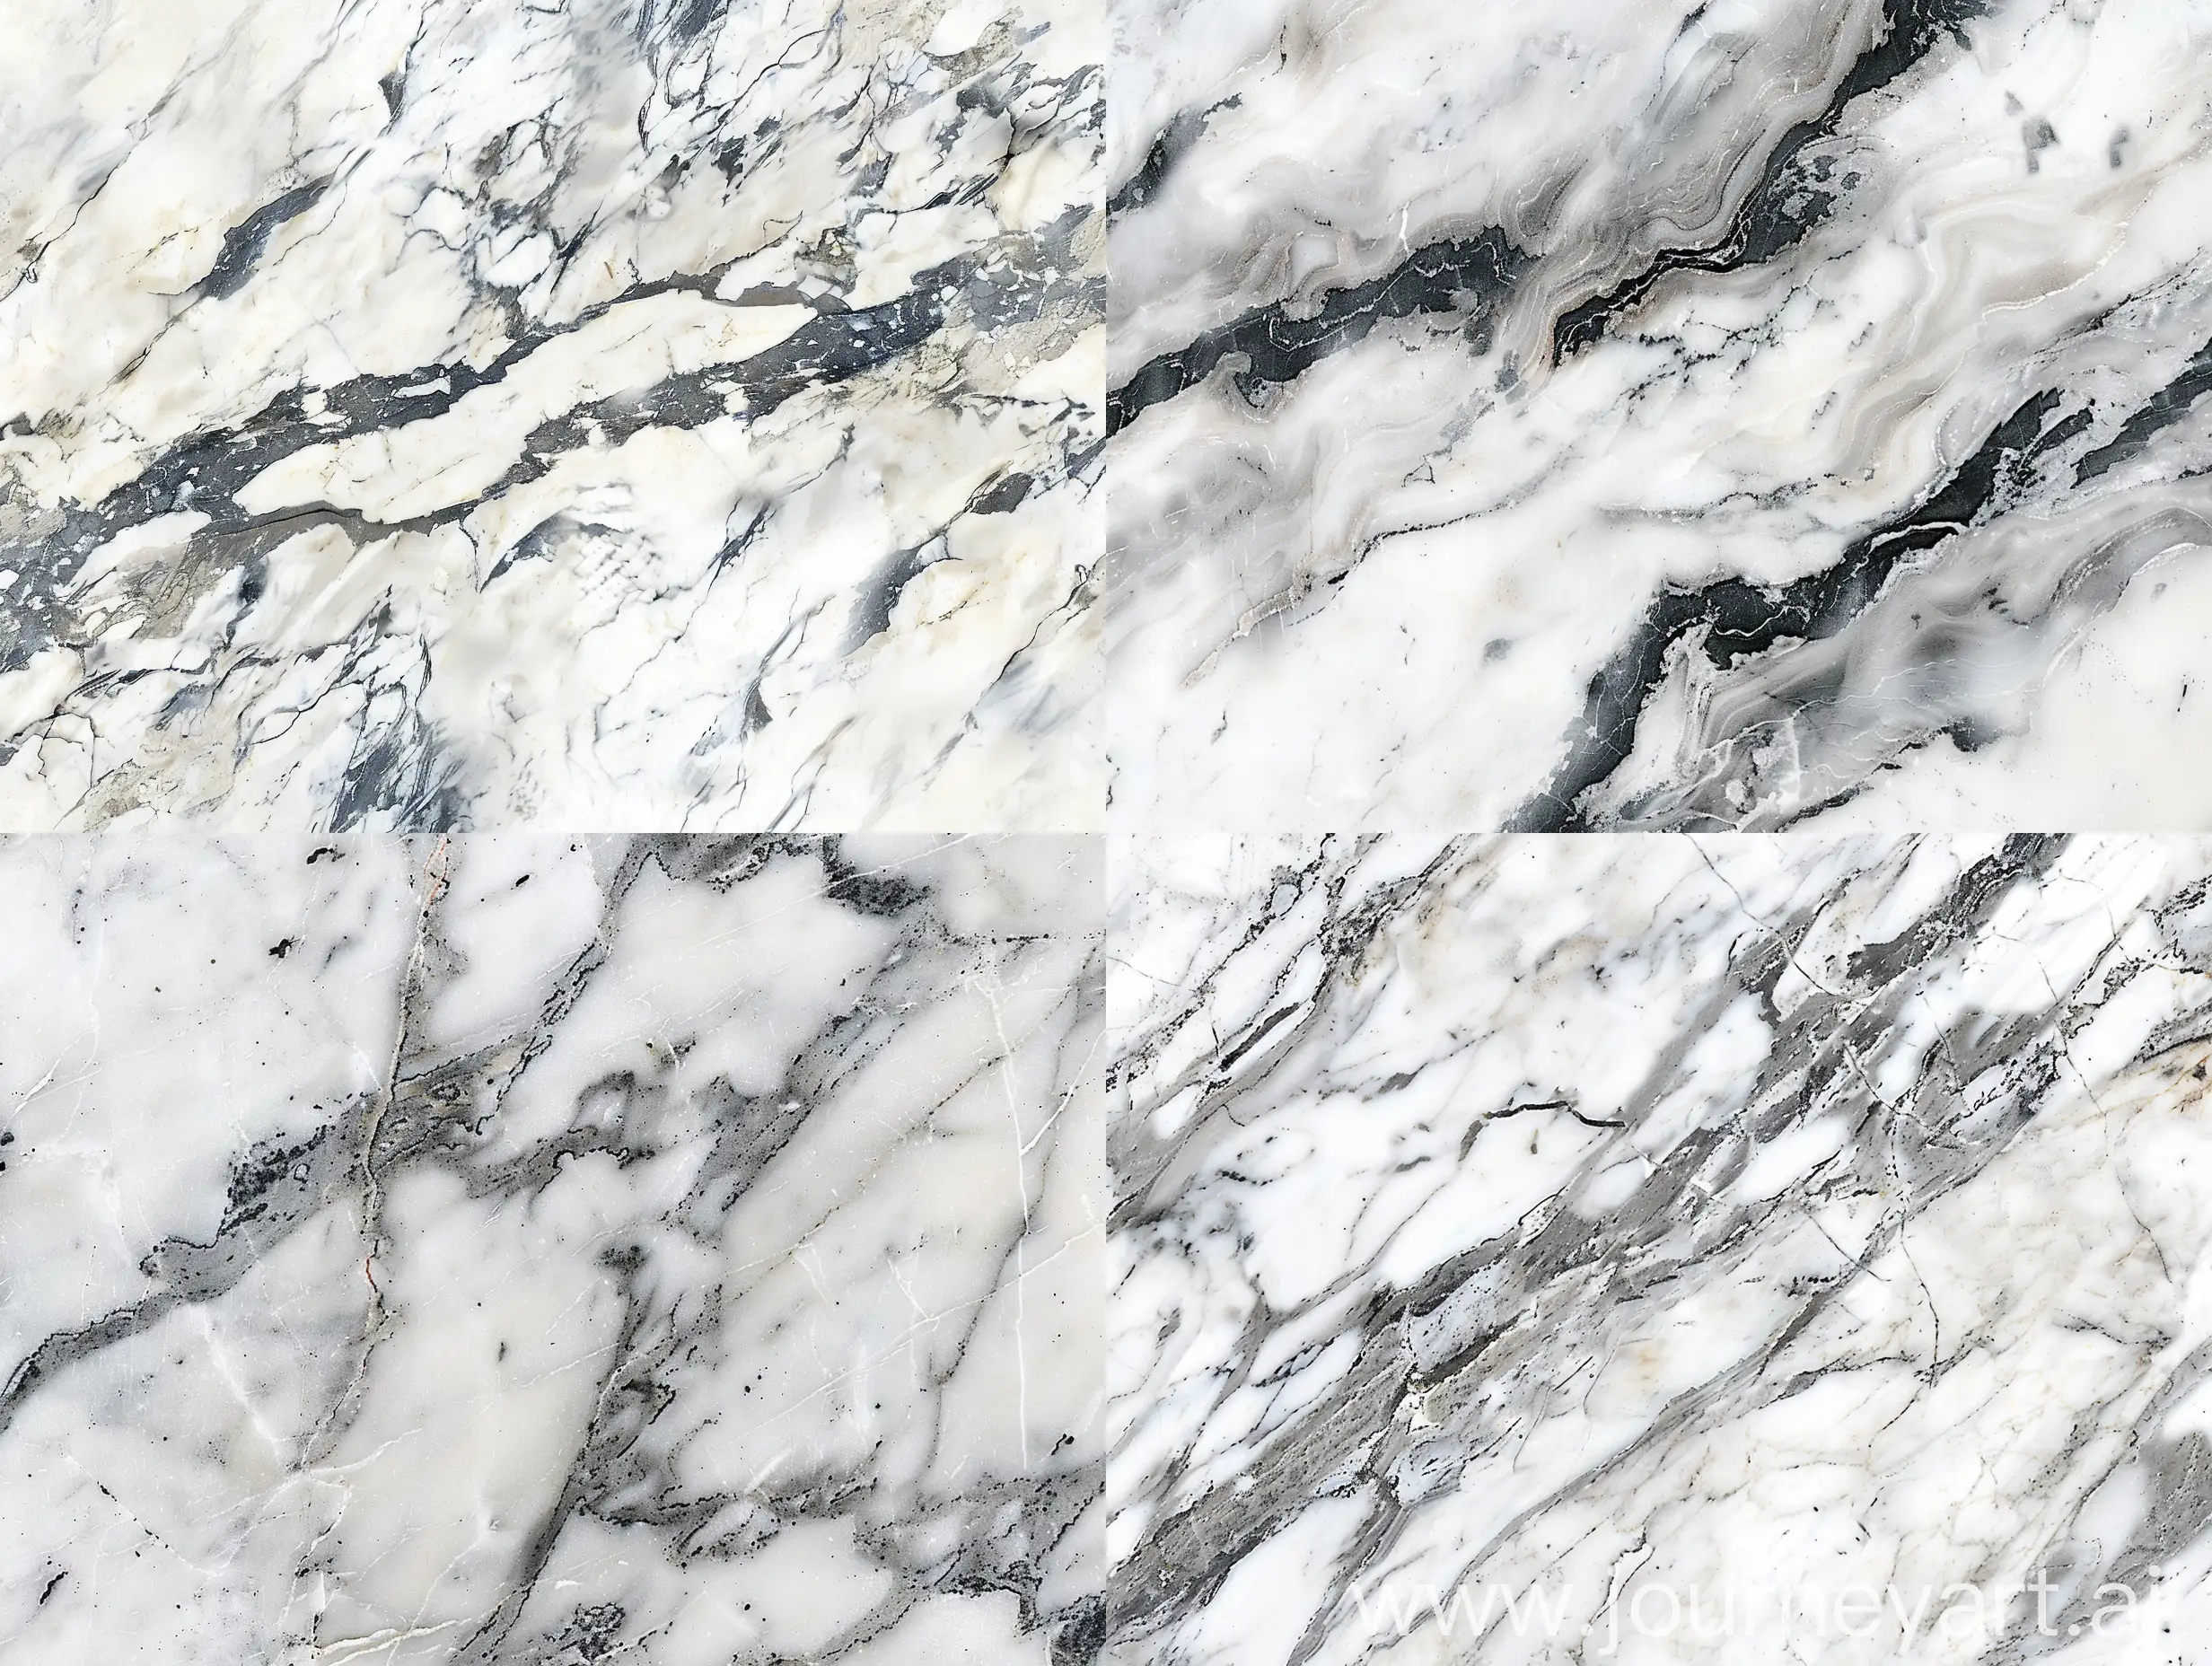 Elegant marble texture (marble texture) in white shades of gray and black, background